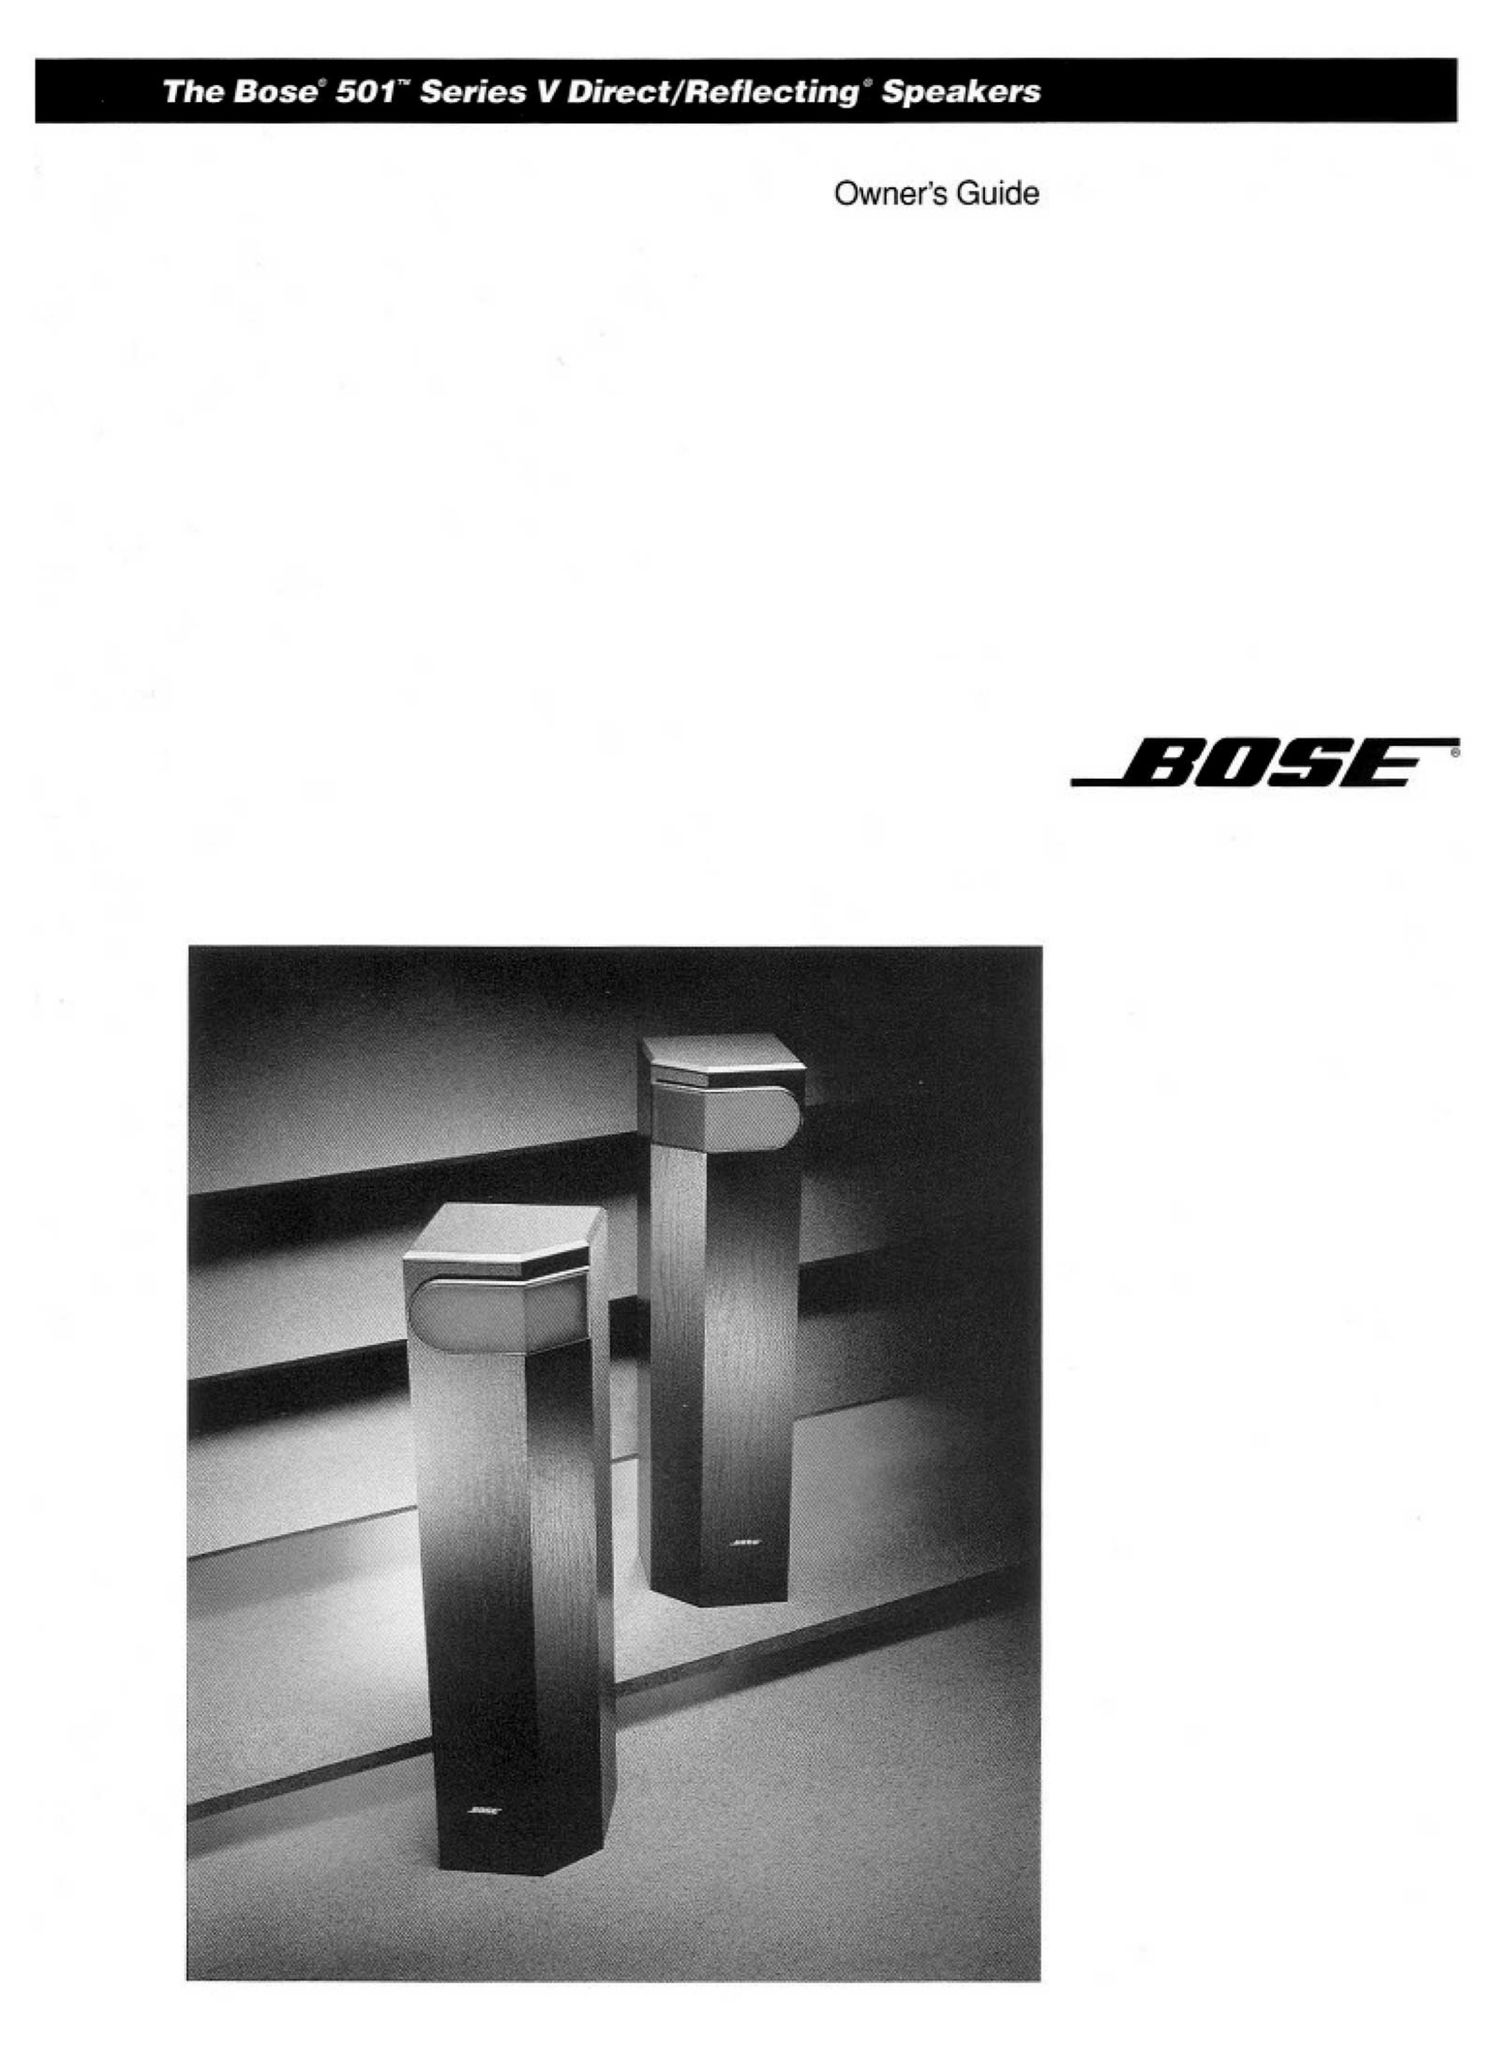 bose 501 owners guide